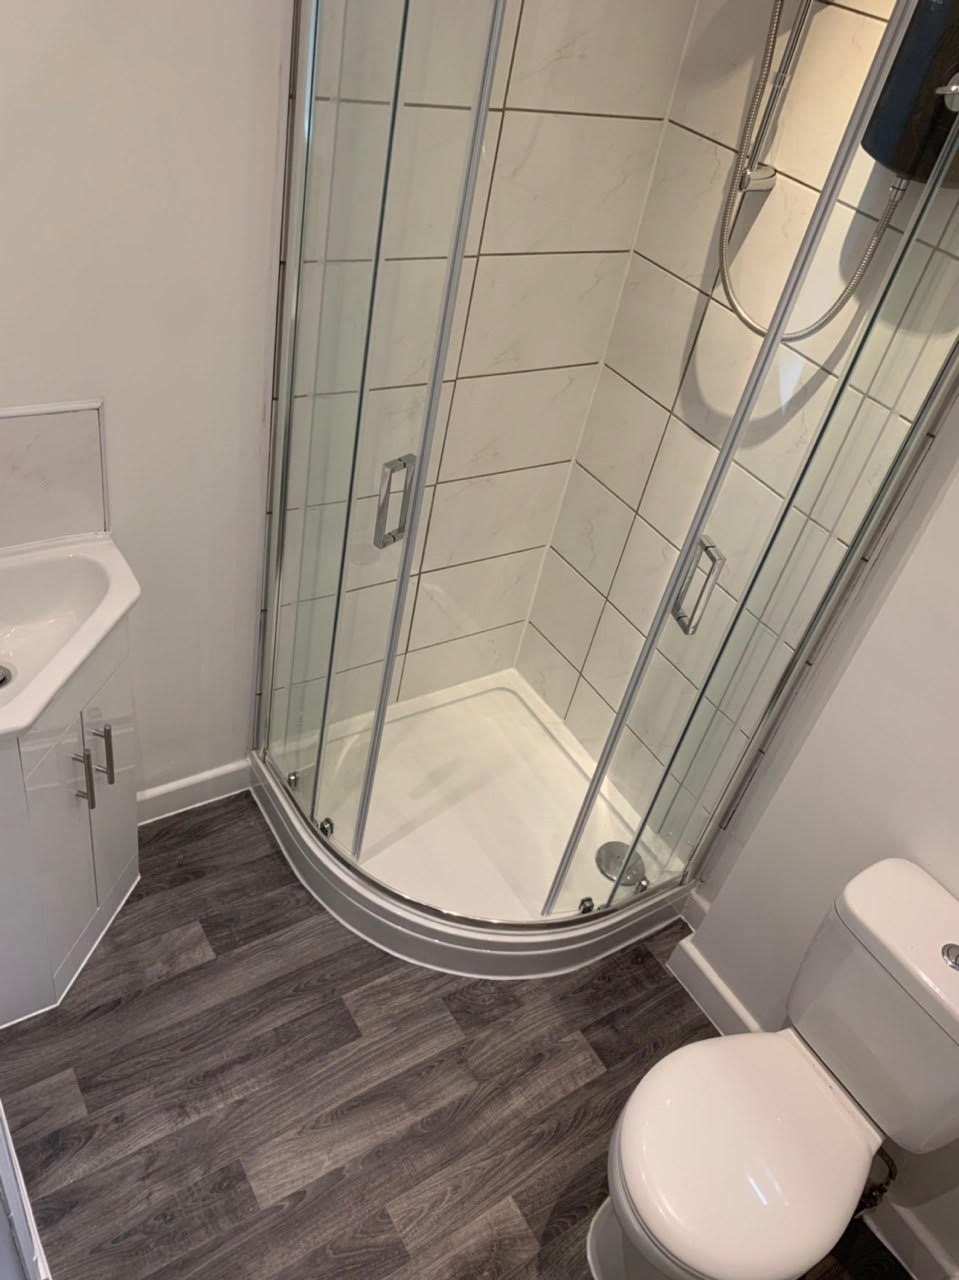 Recently completed bathroom refurbishment from this week. Enquire now for a free quotation 3